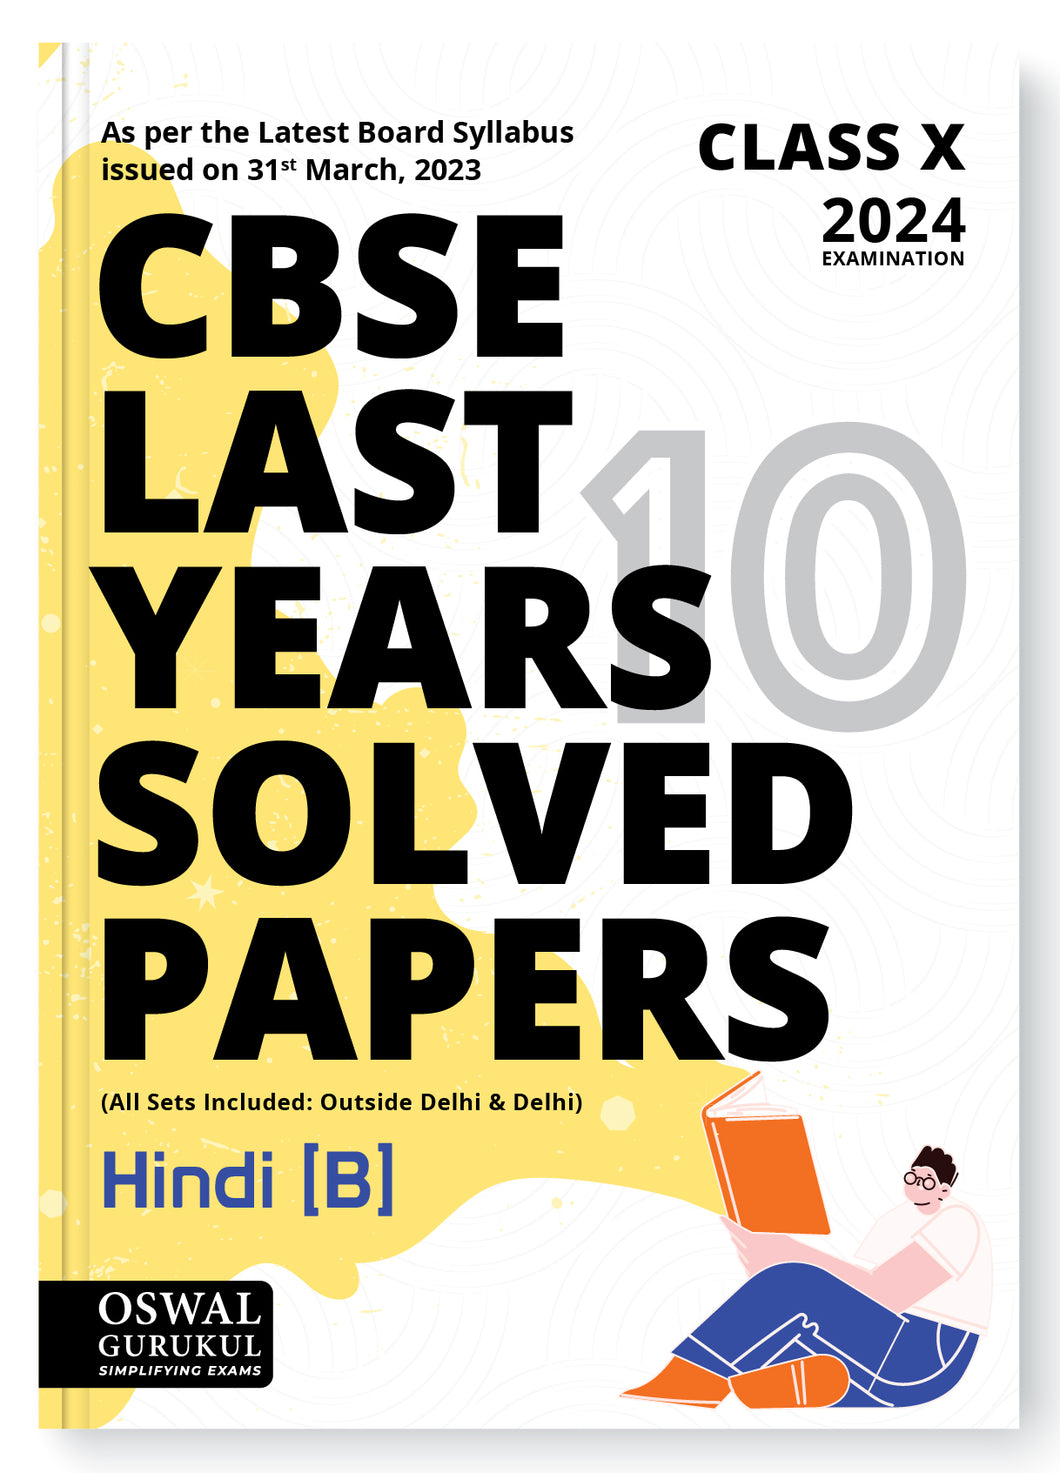 Oswal - Gurukul Hindi B Last Years 10 Solved Papers : CBSE Class 10 for Exam 2024